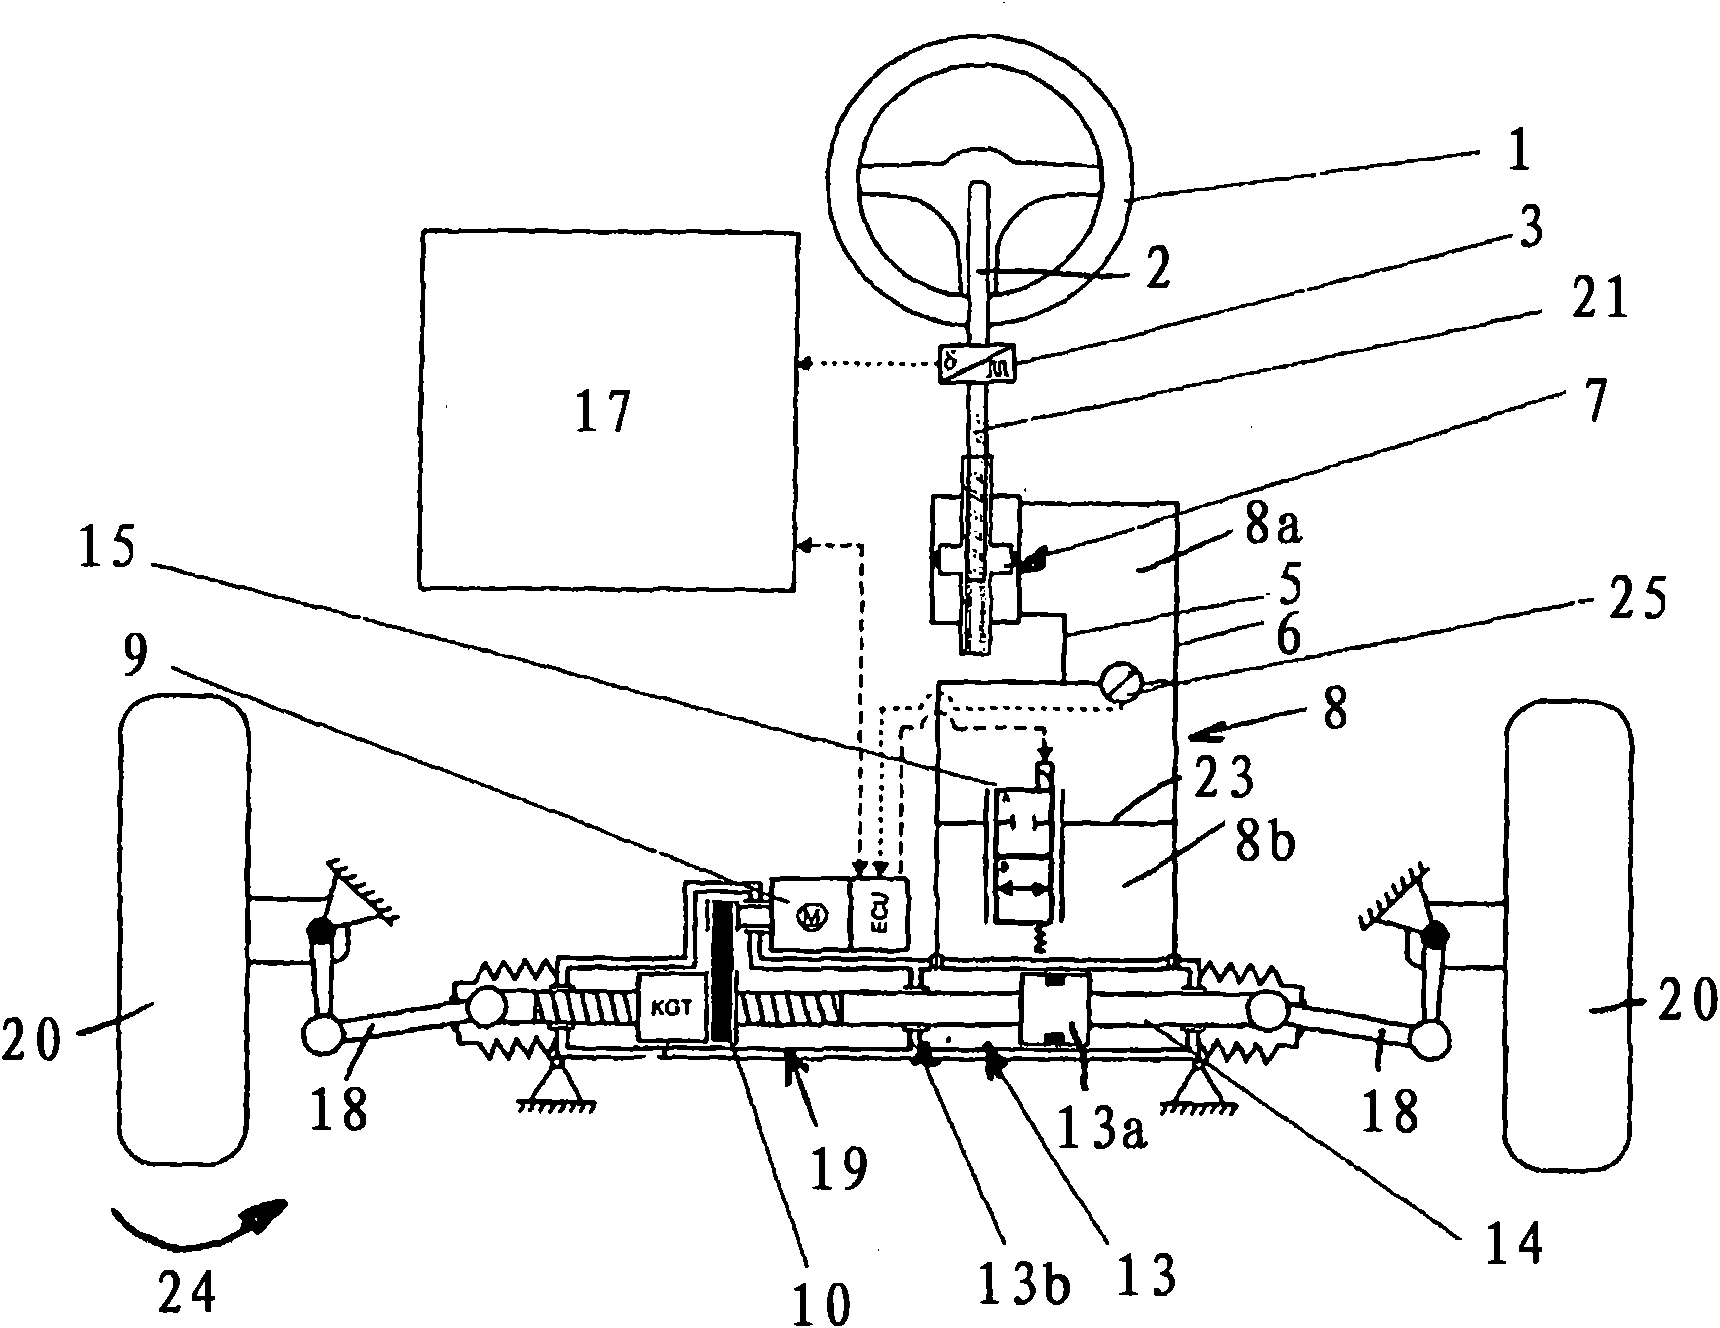 Vehicle steering system of the by-wire design type